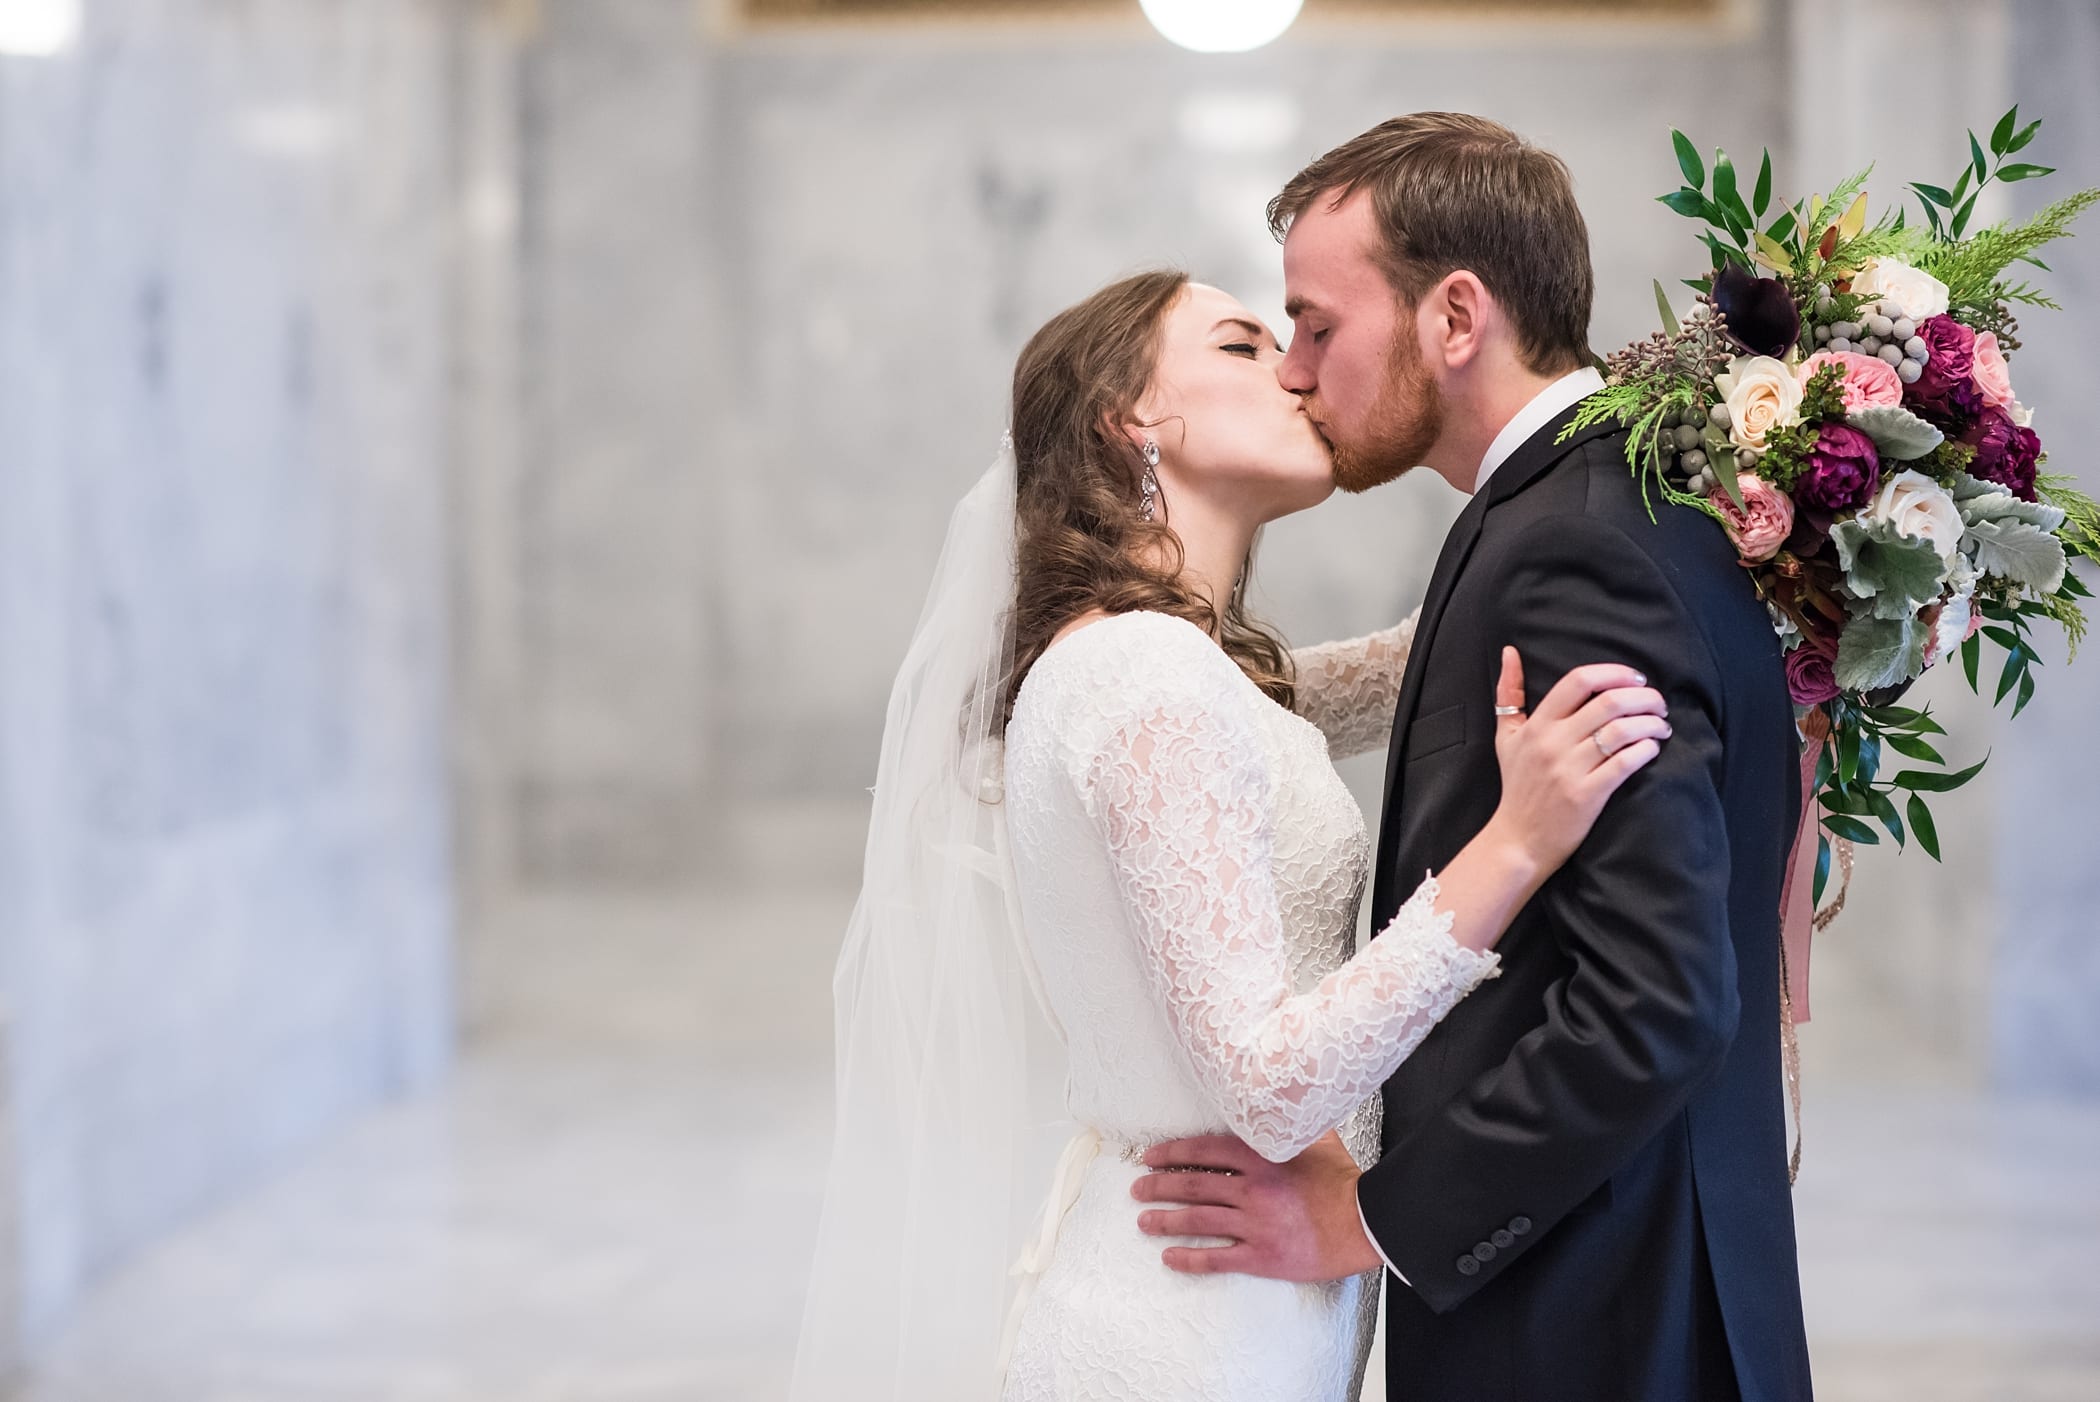 Formal Session at the Salt Lake City capitol building by Michelle & Logan